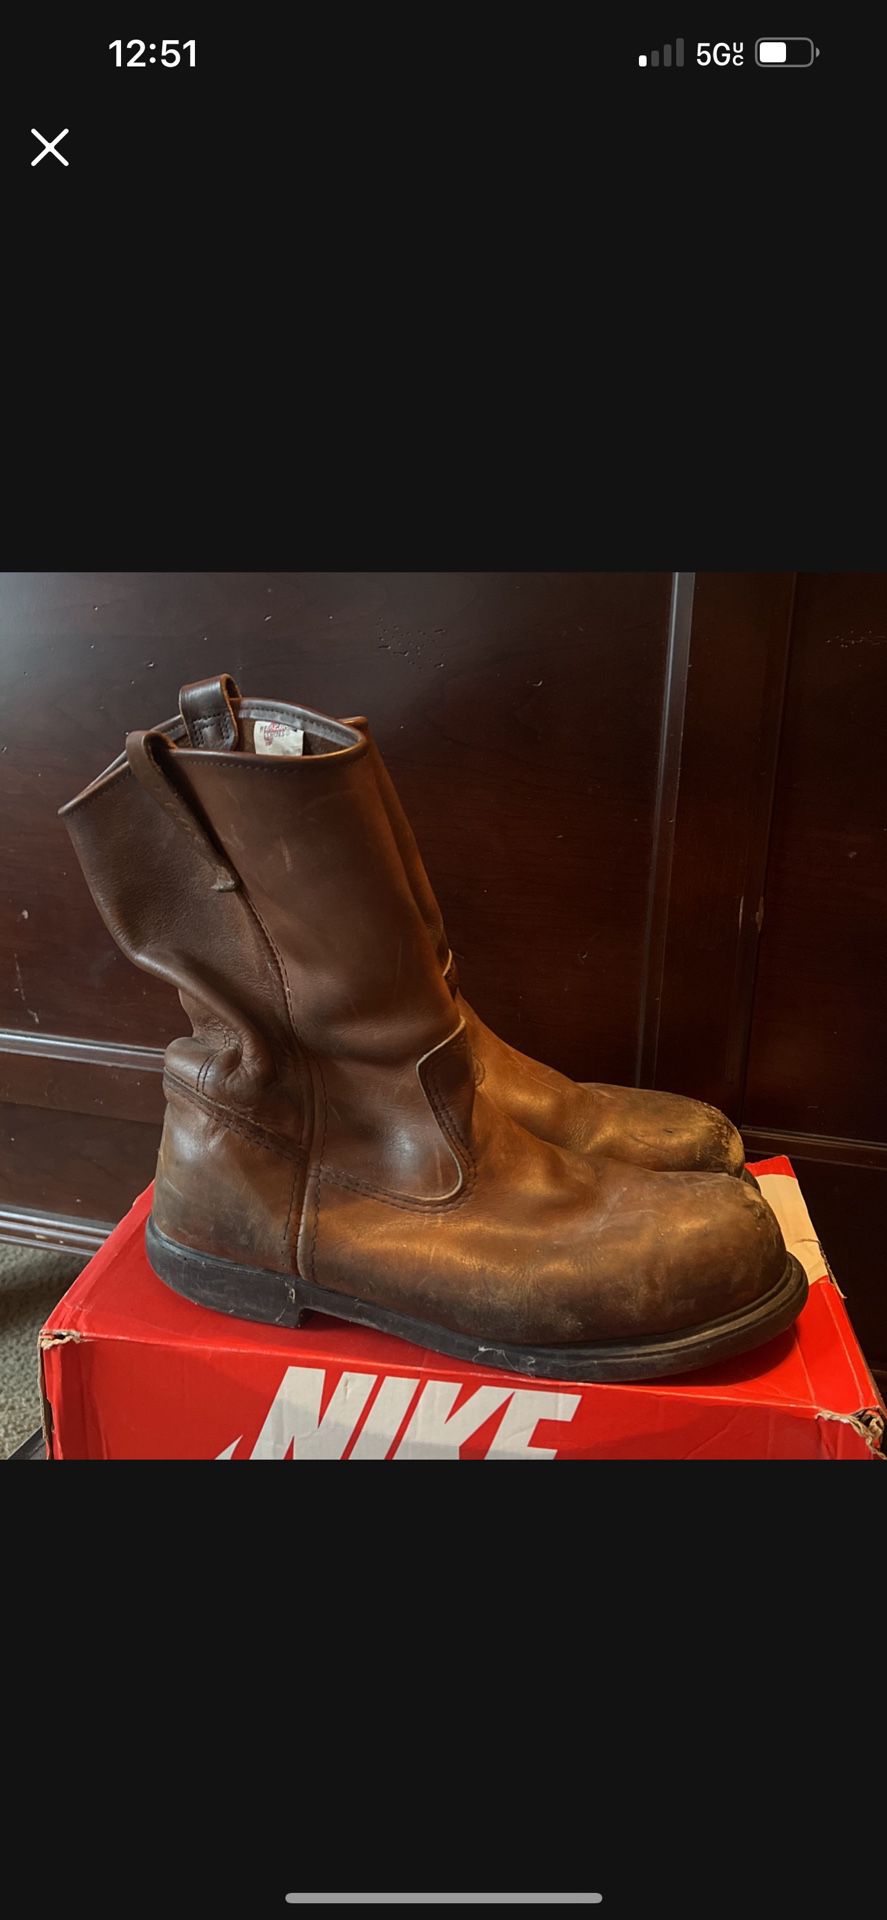 Red Wing Boots Size 11.5